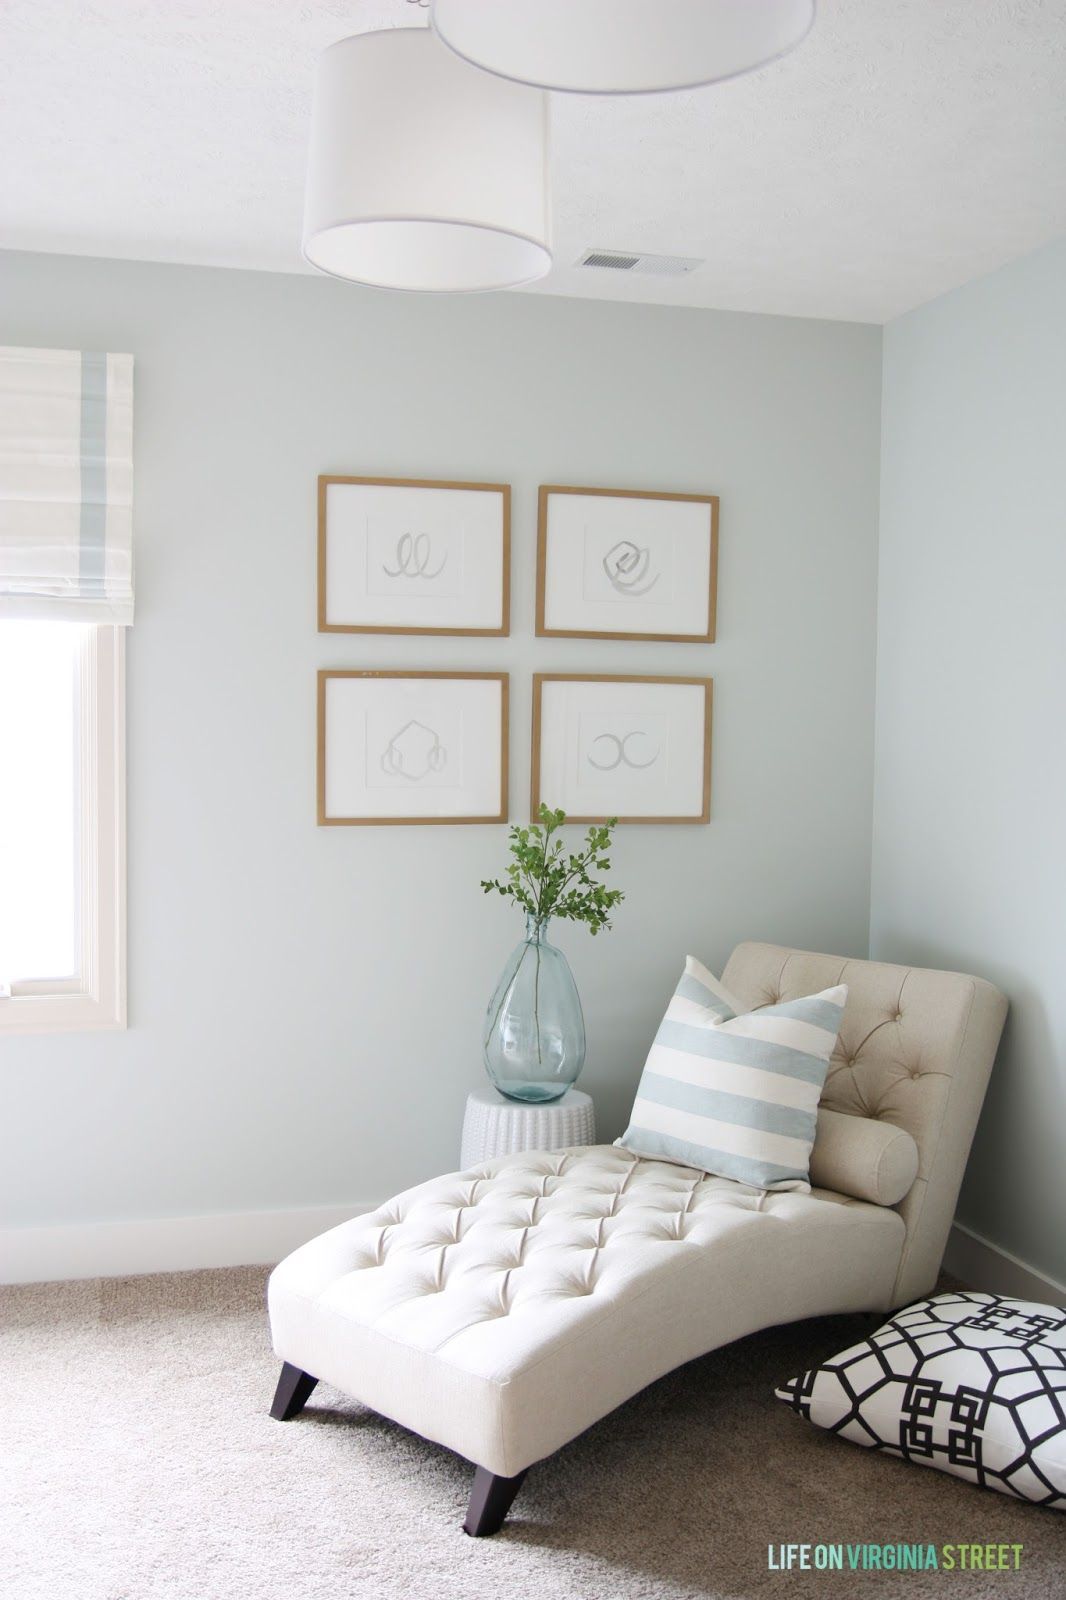 Paint color: Healing Aloe by Benjamin Moore. Love this ENTIRE listing of paint colors in this home – along with those in all their prior homes. So many great paint color